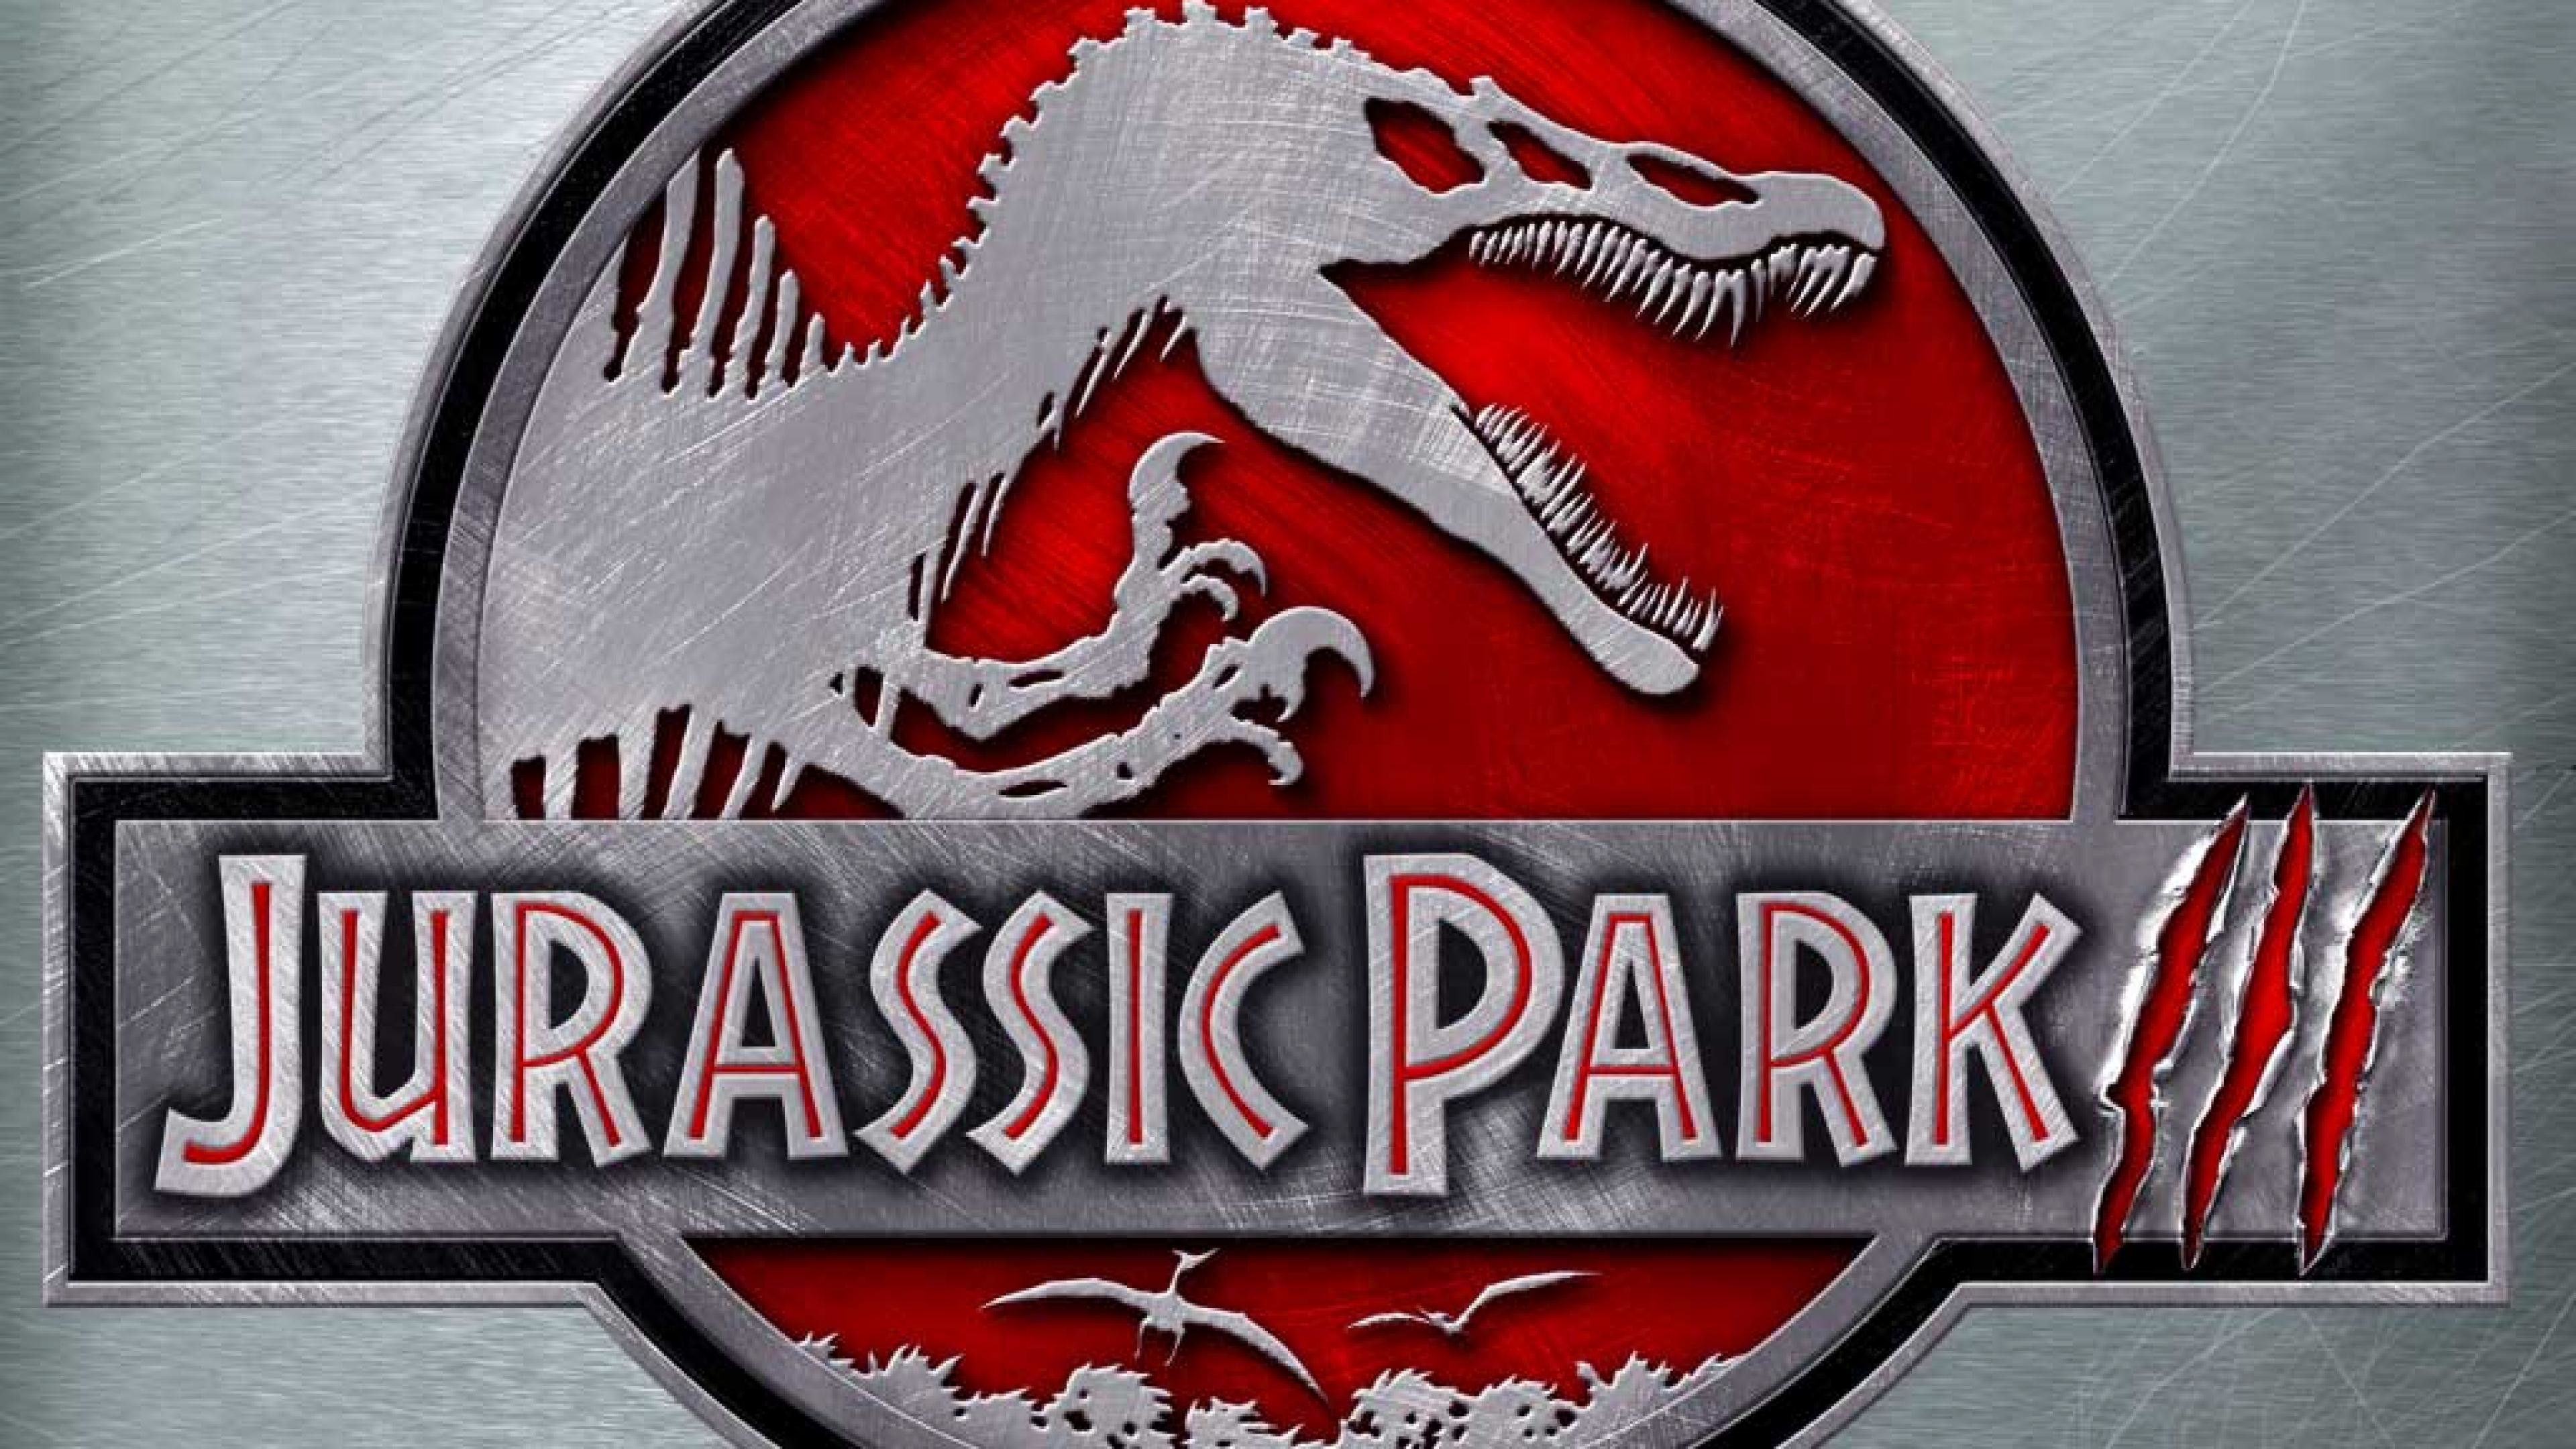 Jurassic Park III HD Wallpapers and Backgrounds